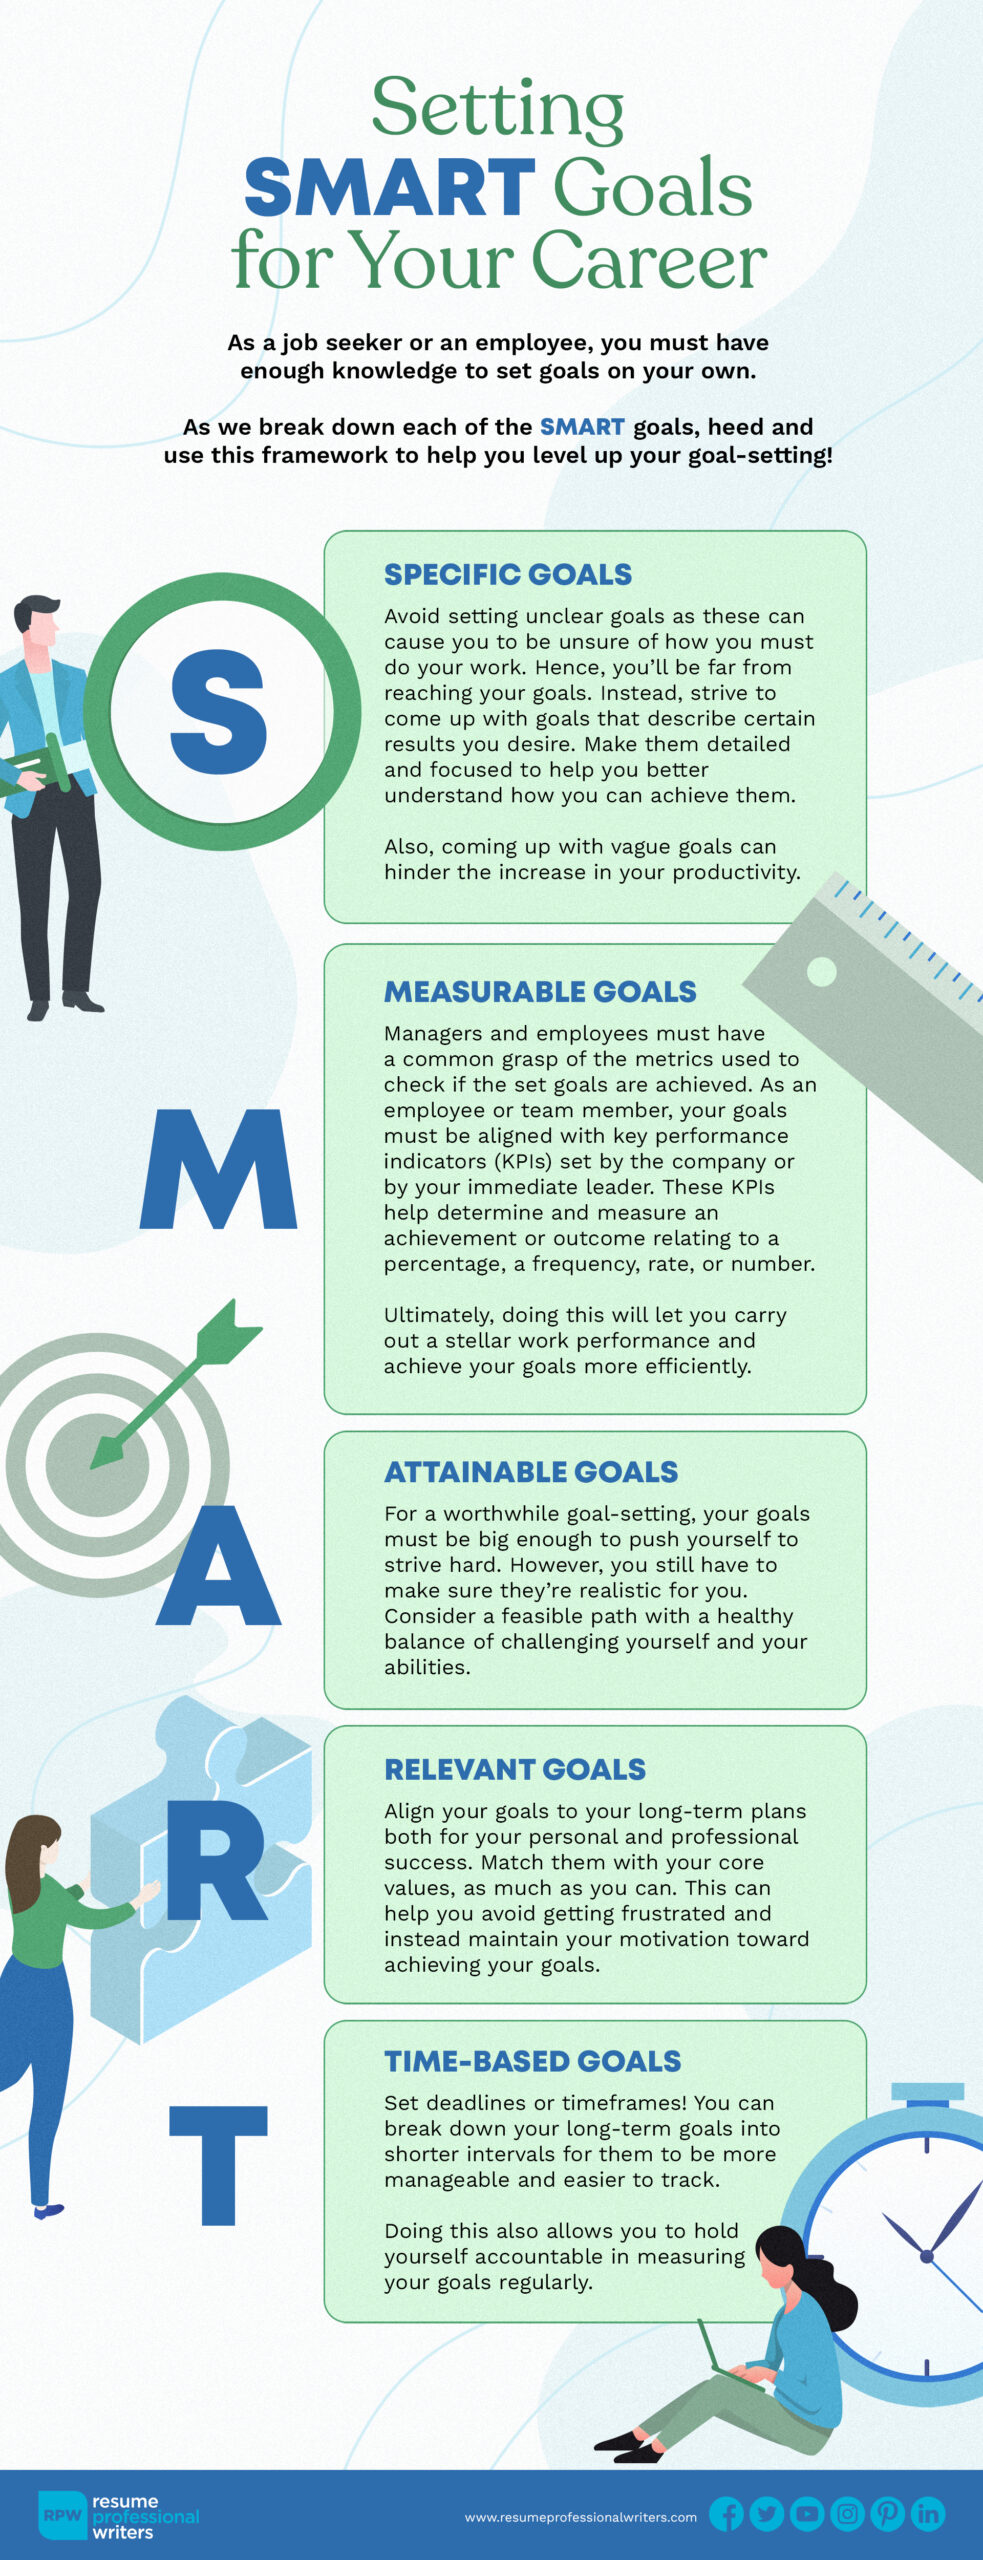 Infographic On A Guide To Setting Smart Goals For Your Career